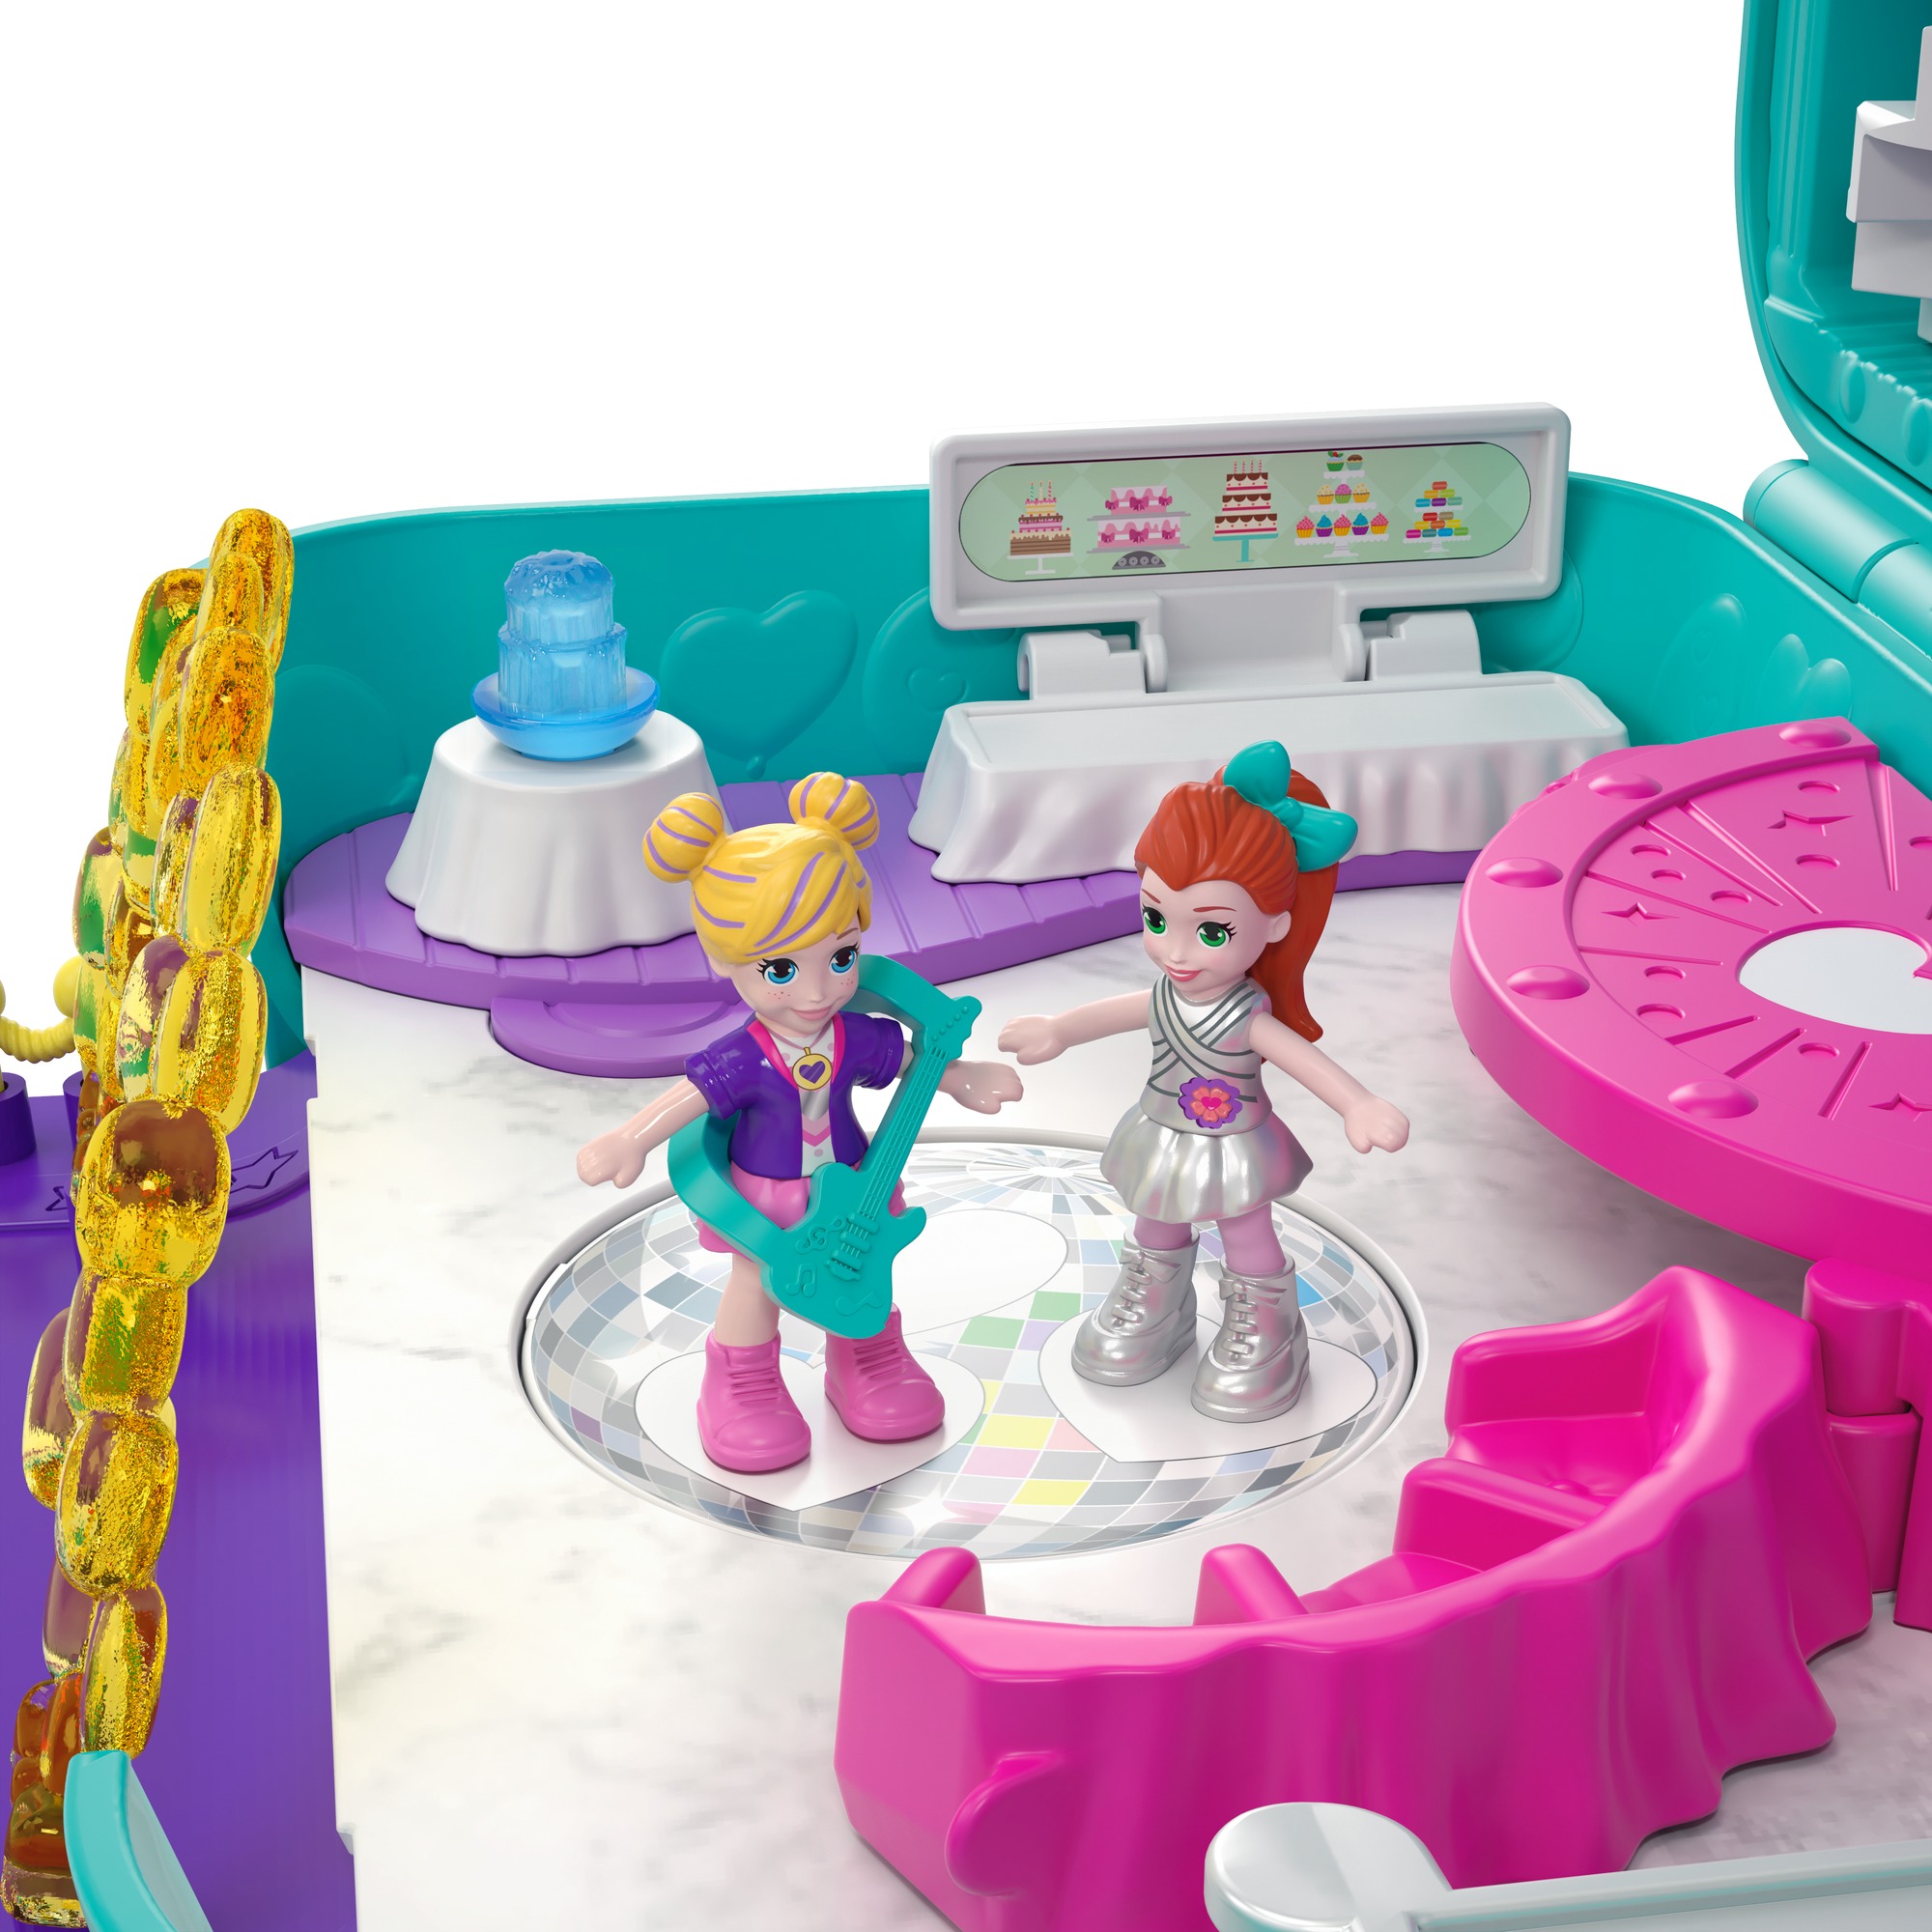 Polly Pocket Hidden Places Dance Par-taay! Compact with Accessories - image 4 of 10